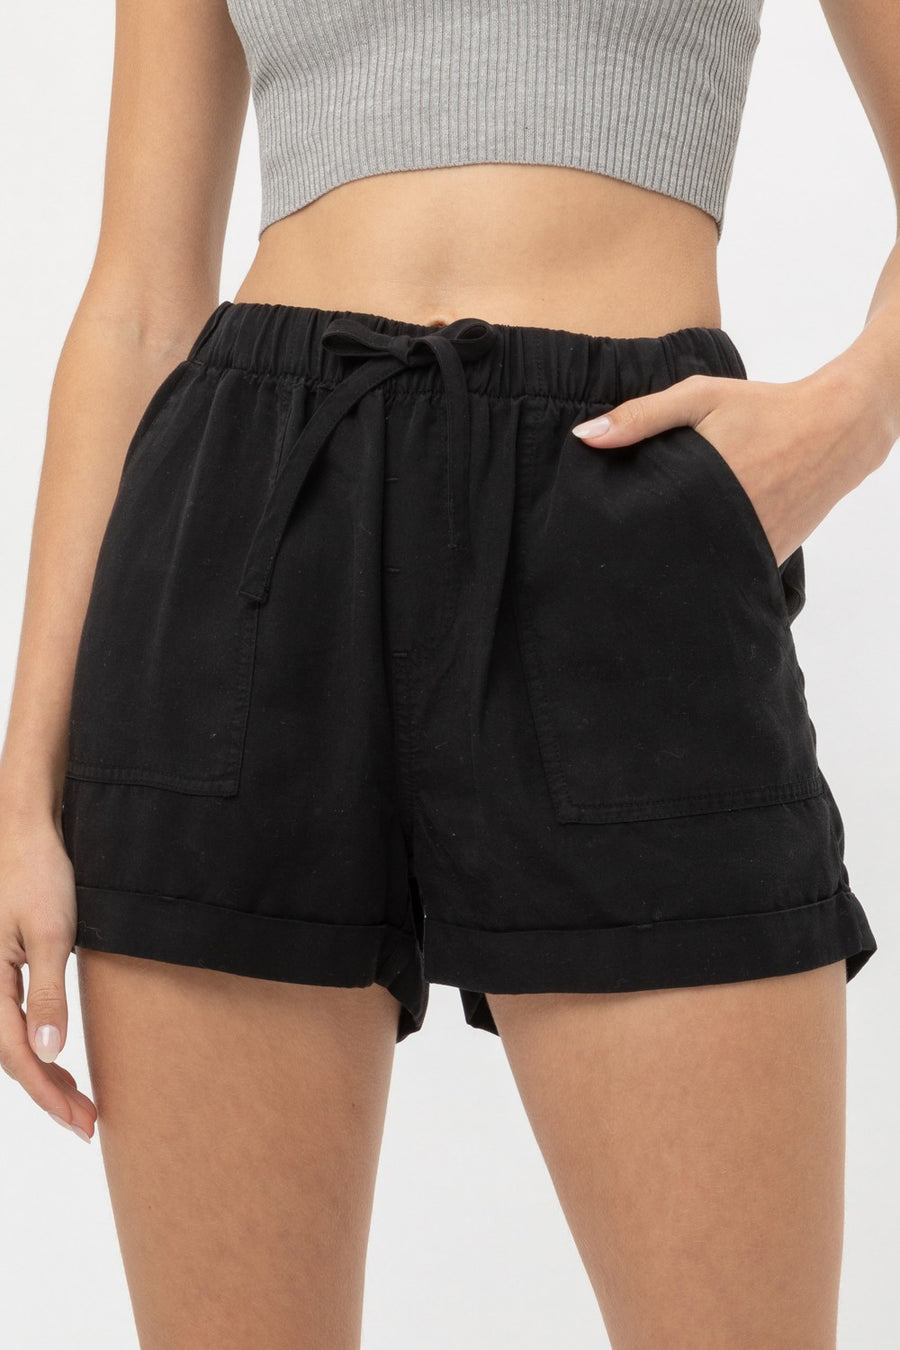 Featuring a loose fit short with an elastic wasit band and draw string to tighten in the color black